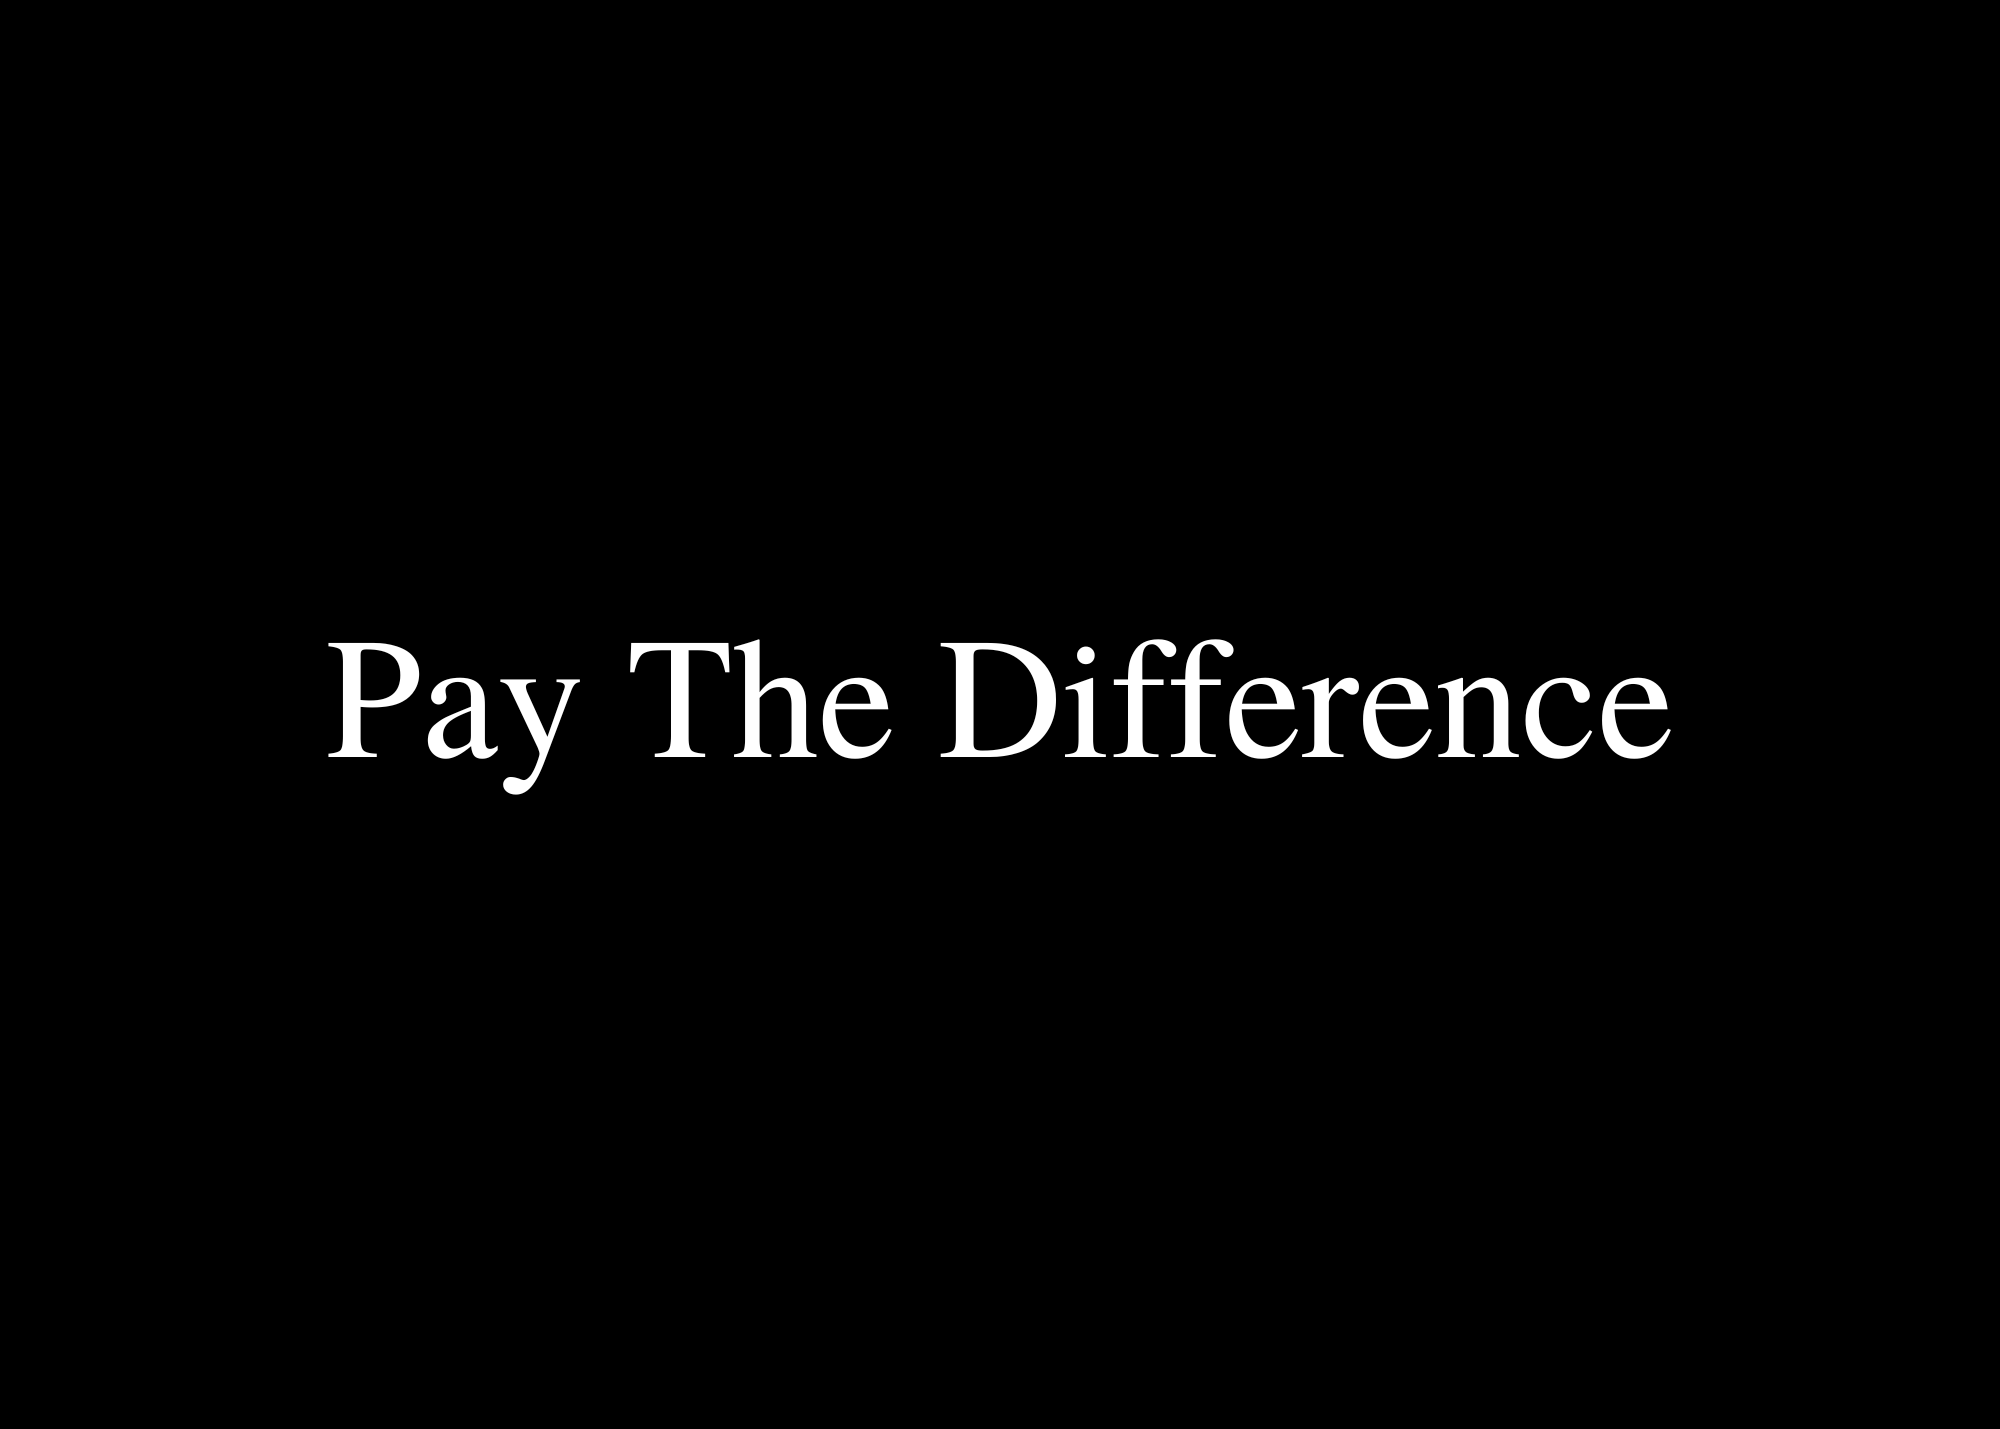 Pay the difference